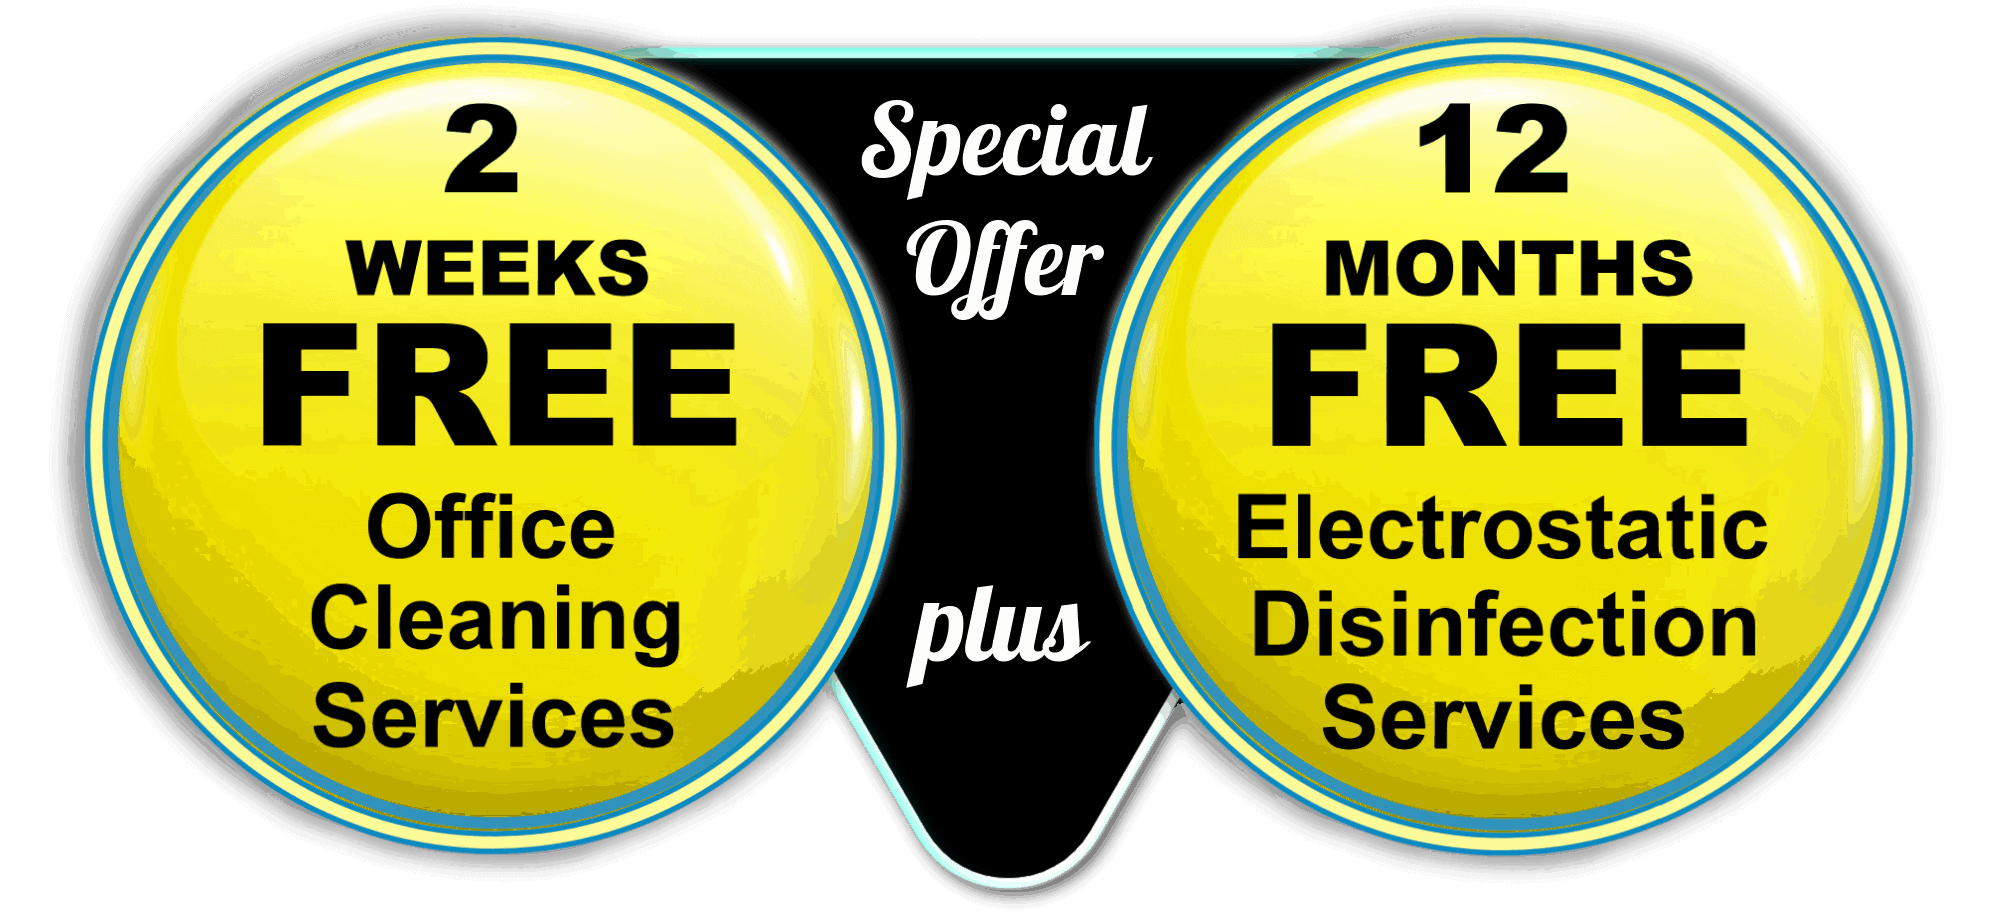 free services offer